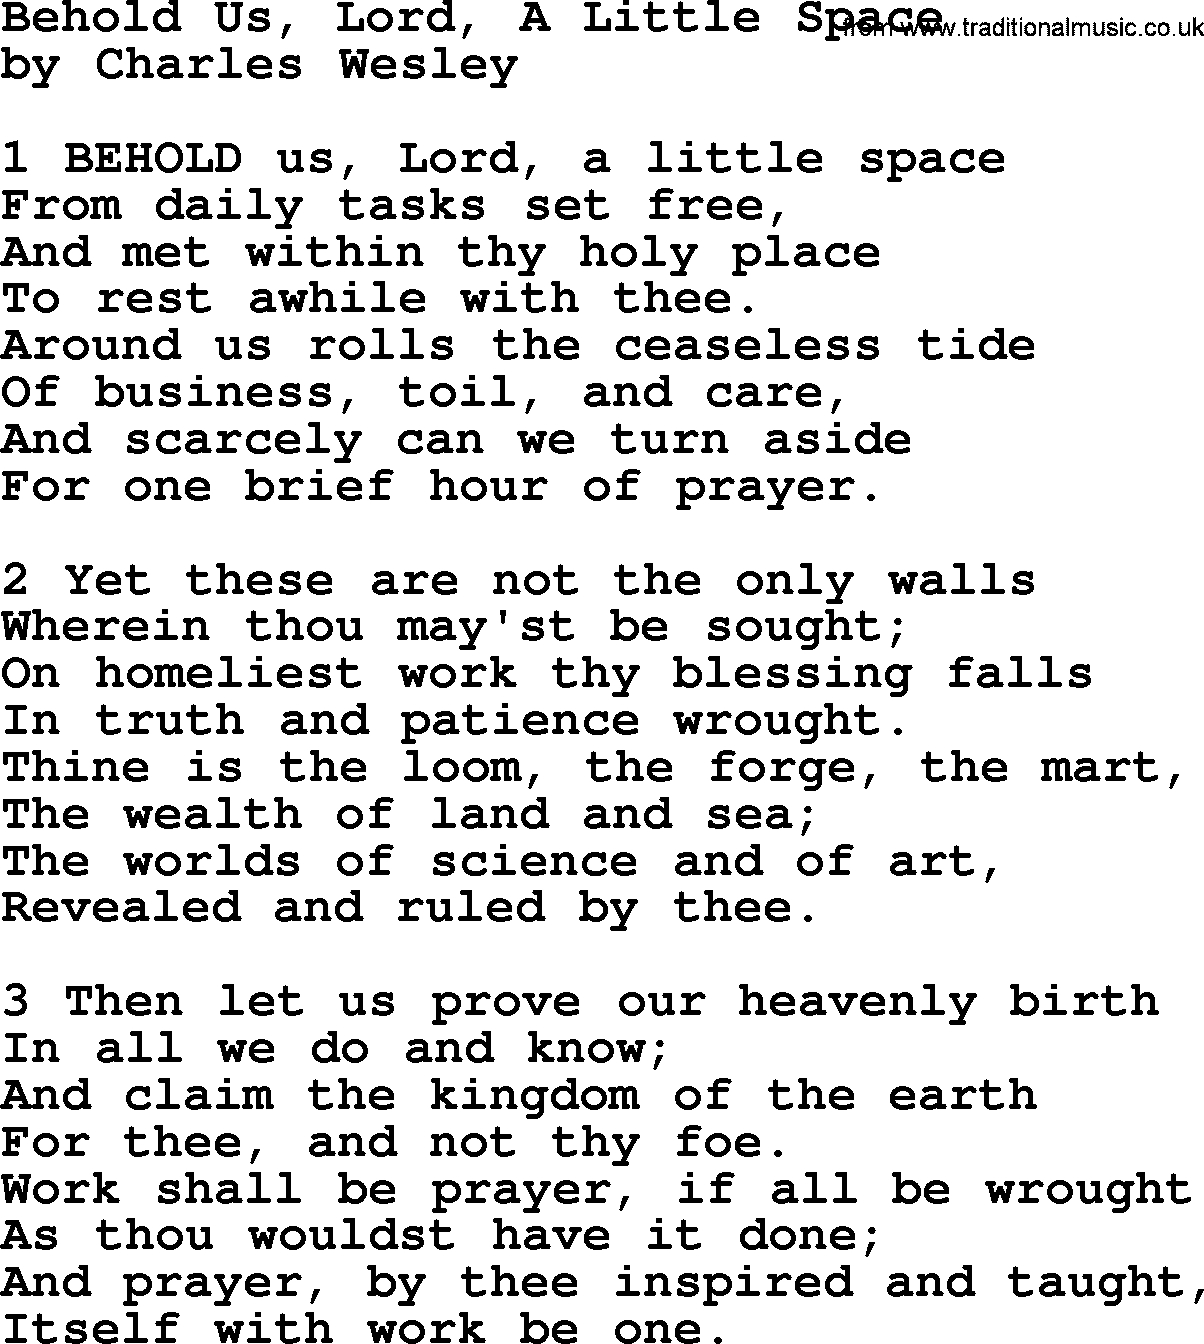 Charles Wesley hymn: Behold Us, Lord, A Little Space, lyrics